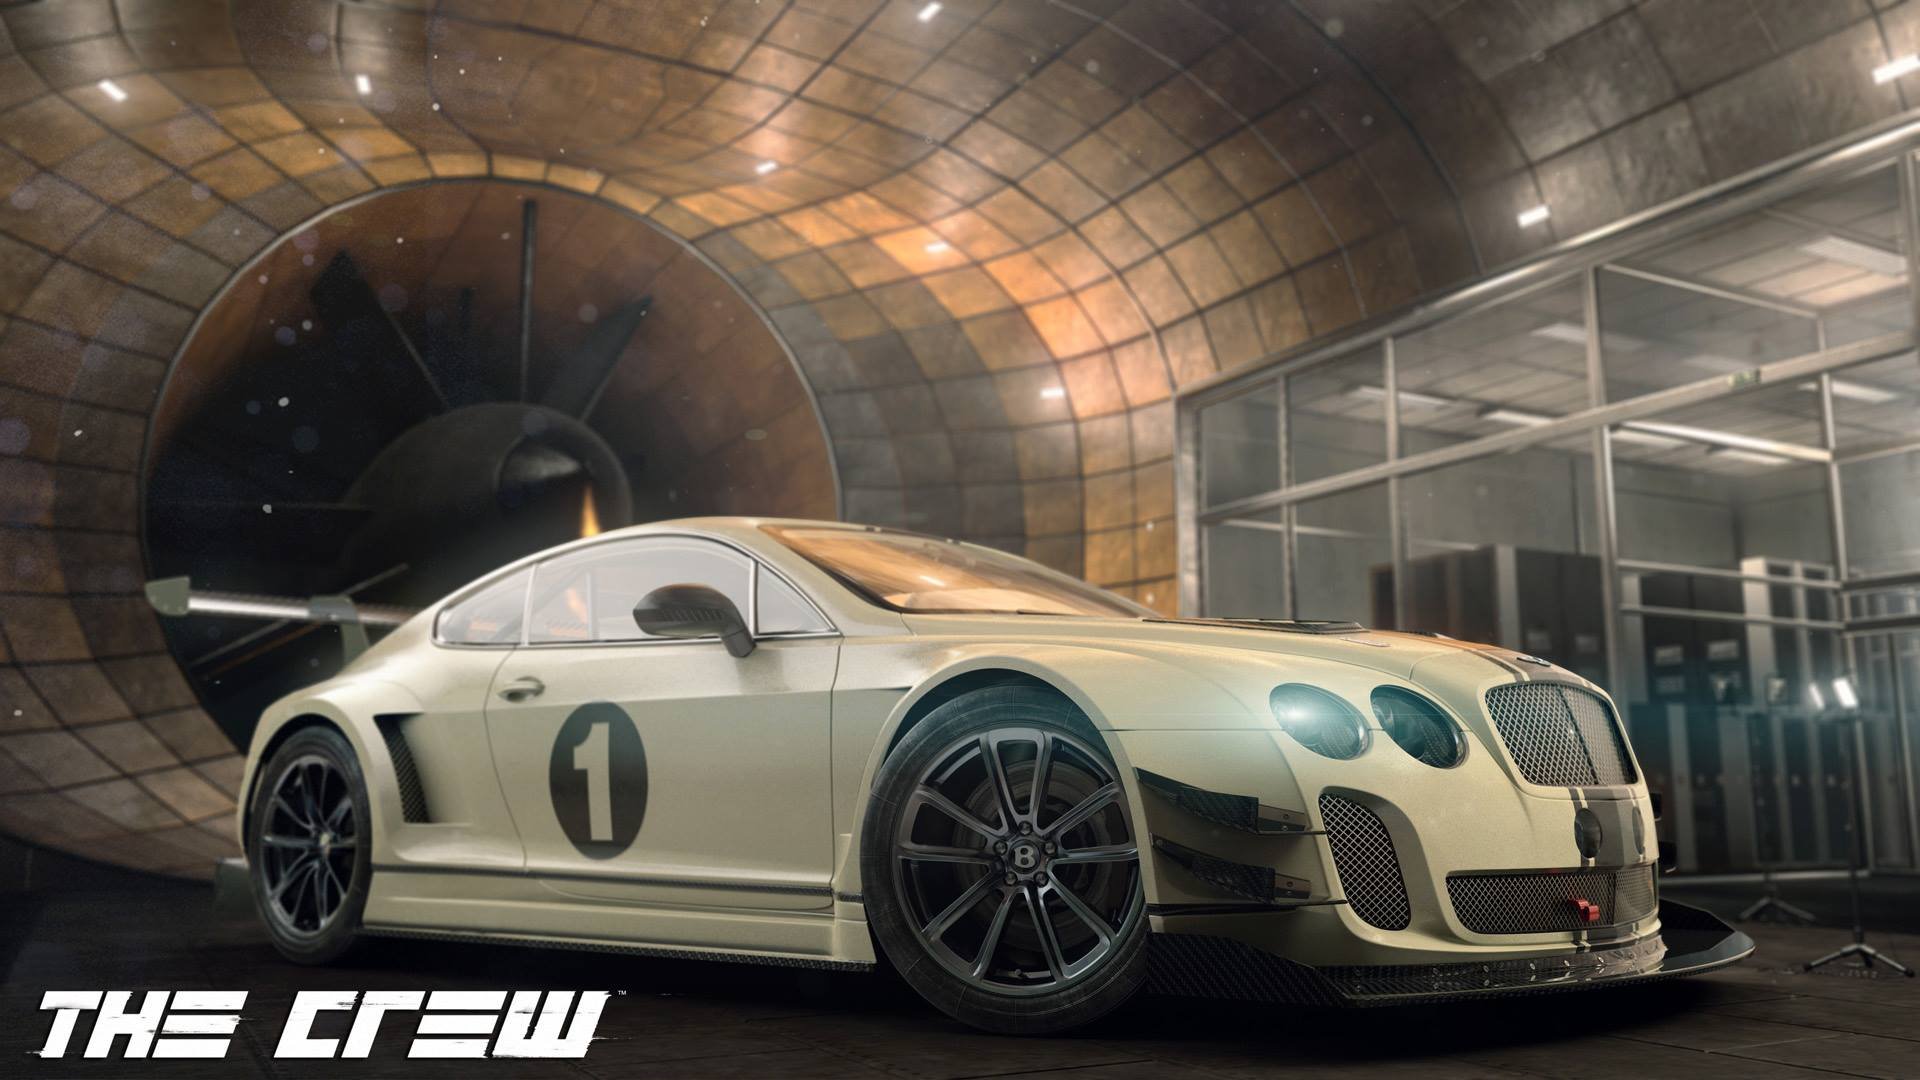 the crew, Racing, Race, Muscle, Tuning, Supercar, Crew, Rpg,  9 Wallpaper